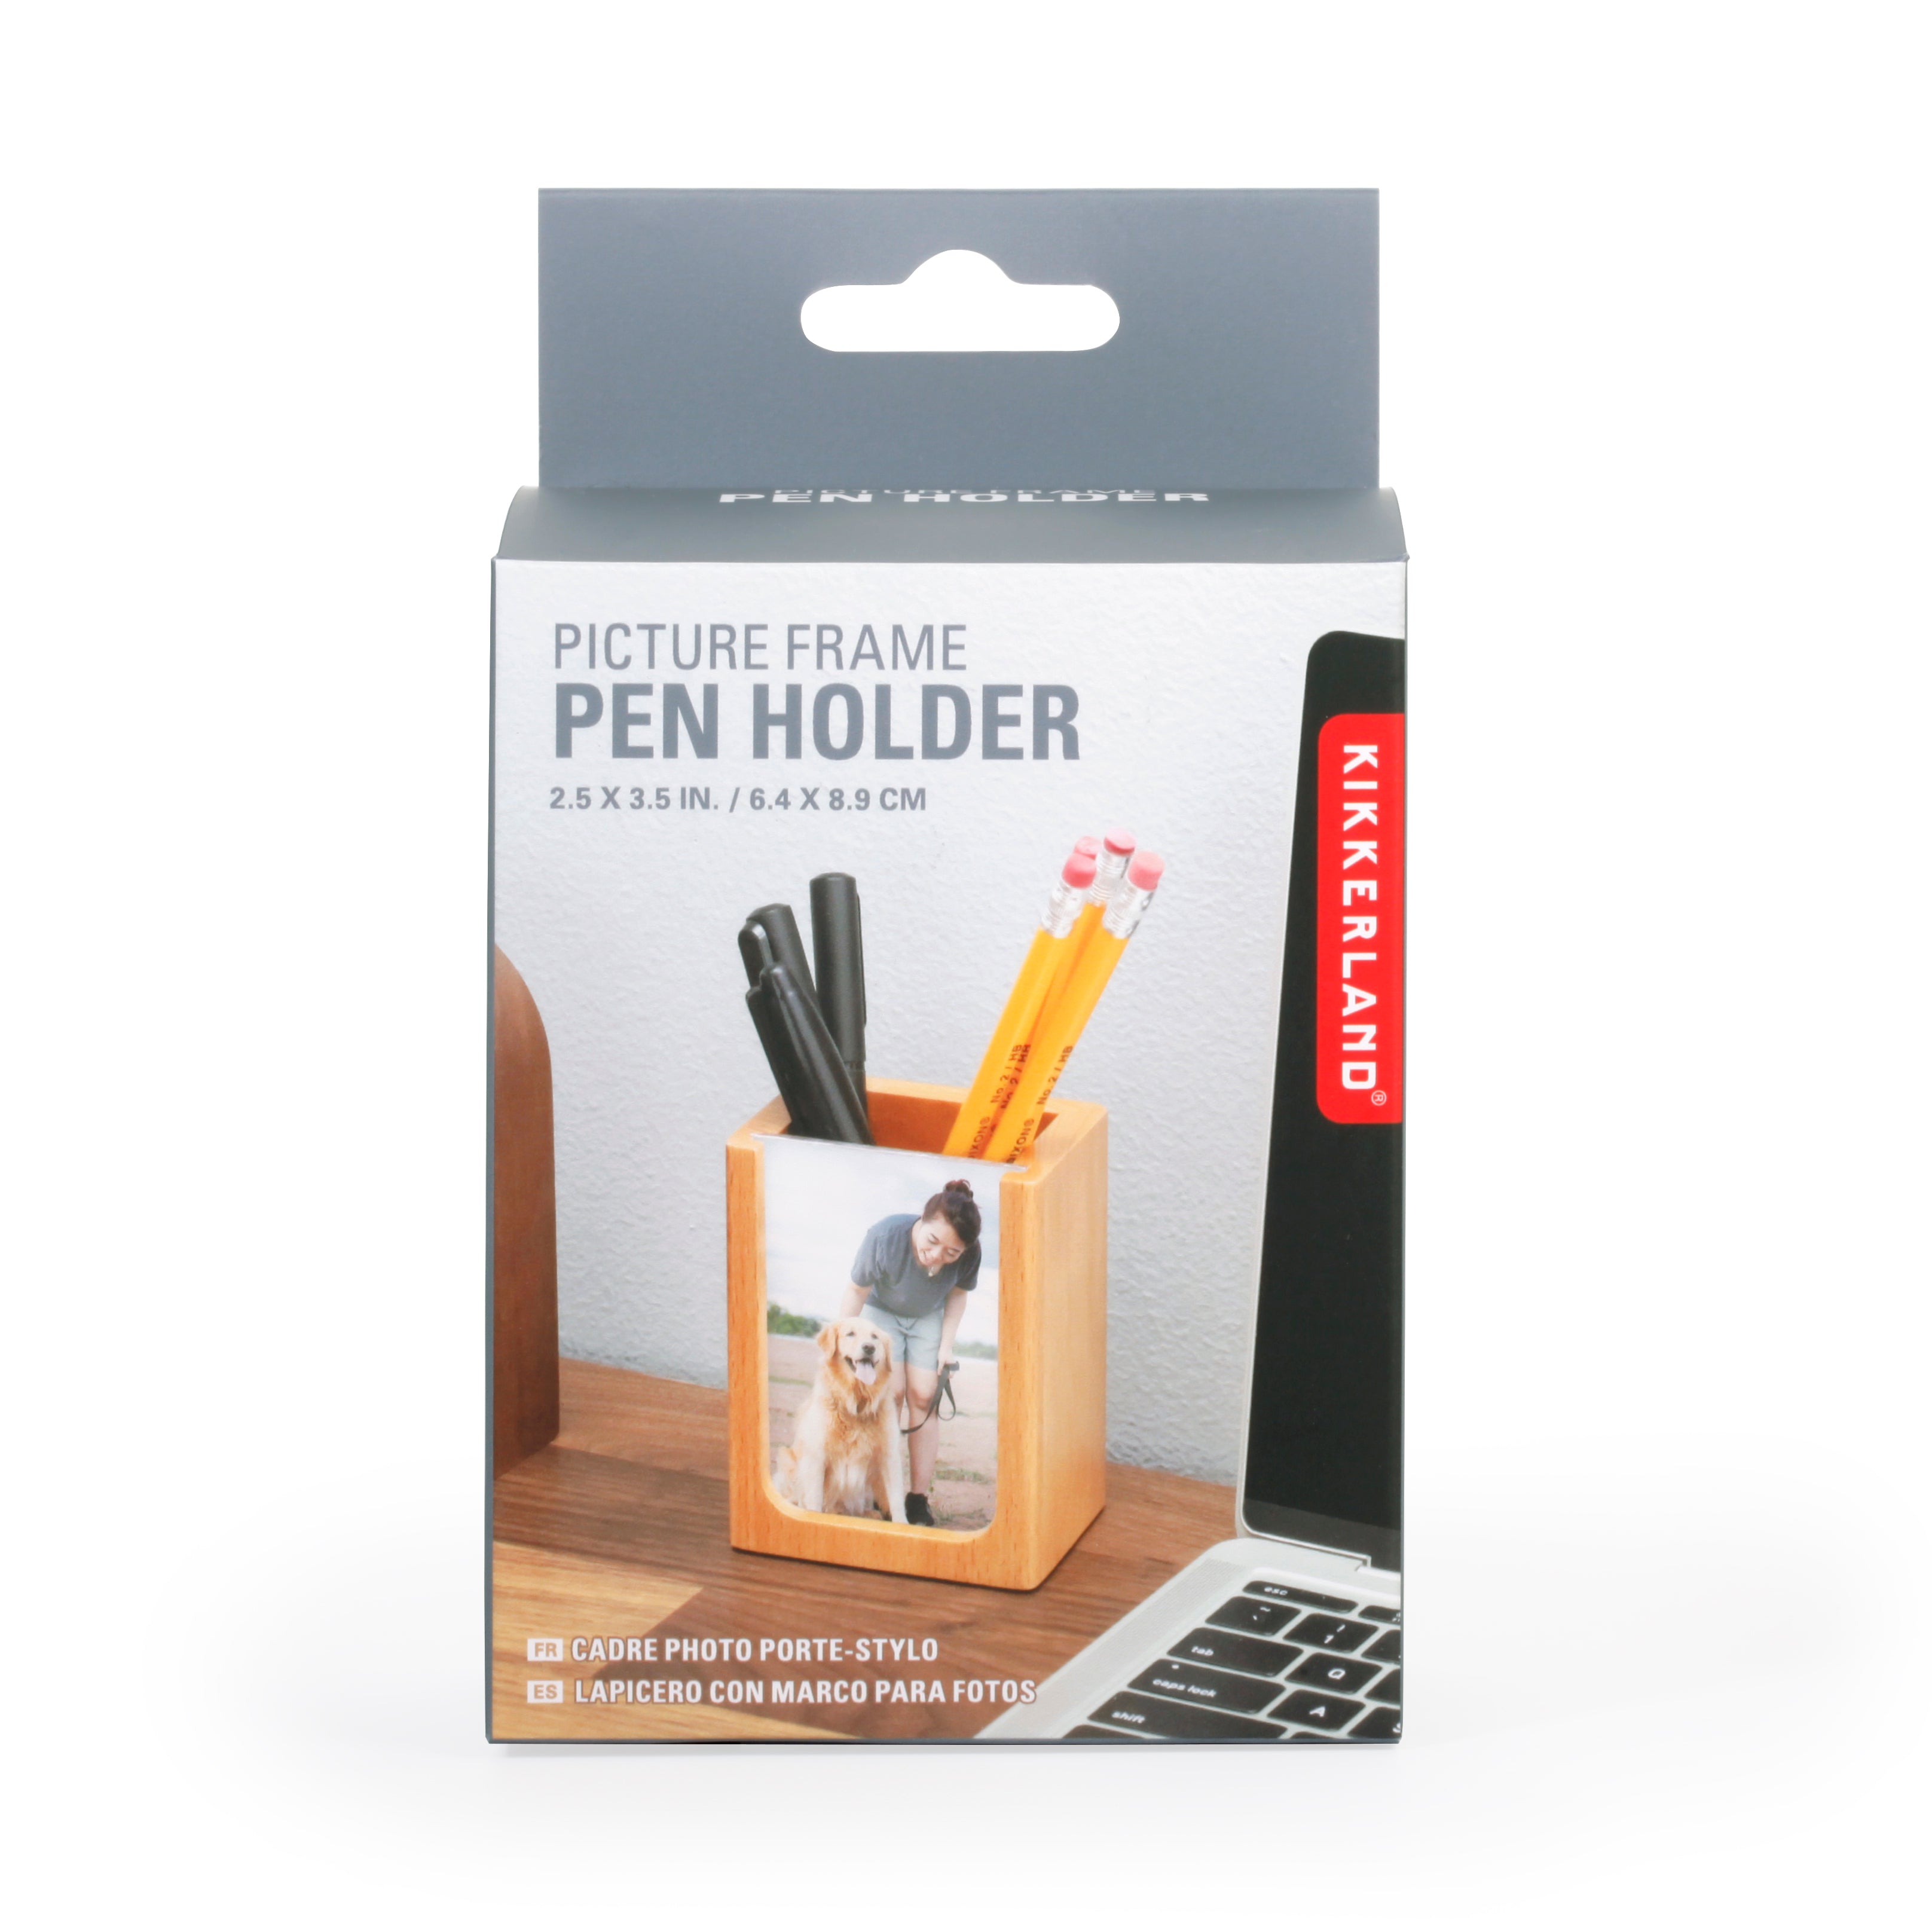 Pen Holder with Picture Frame